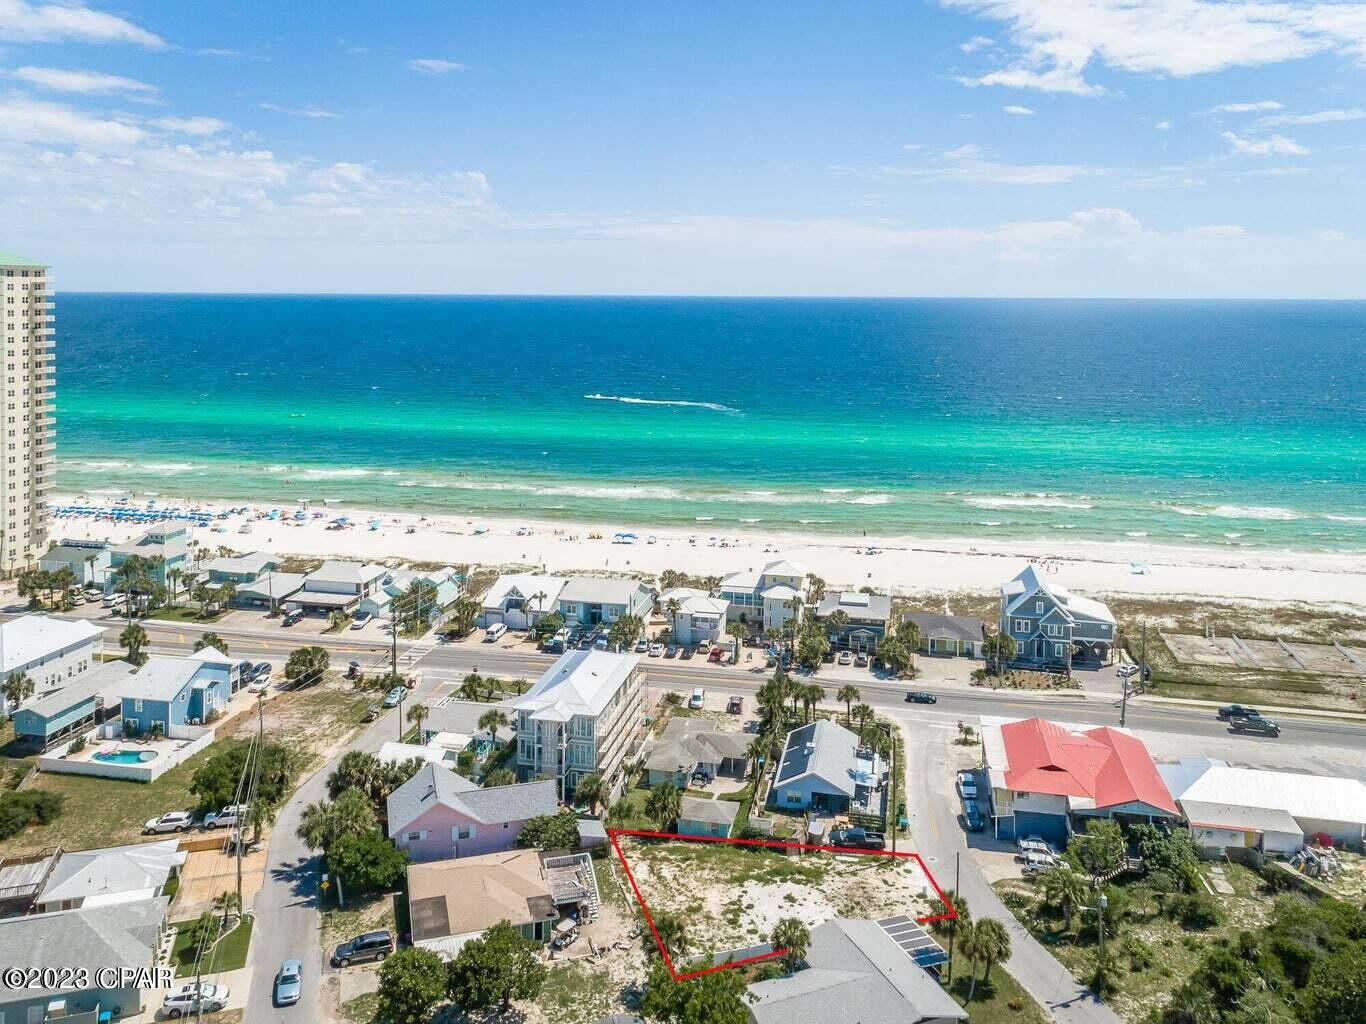 Your dream home is in your head and in your heart.  The lot to build it is 317 S. Wells St.  Steps from The World's Most Beautiful Beaches.  Minutes away from Dining and Shopping at Pier Park.  This is a rare opportunity to own you're very own piece of paradise.